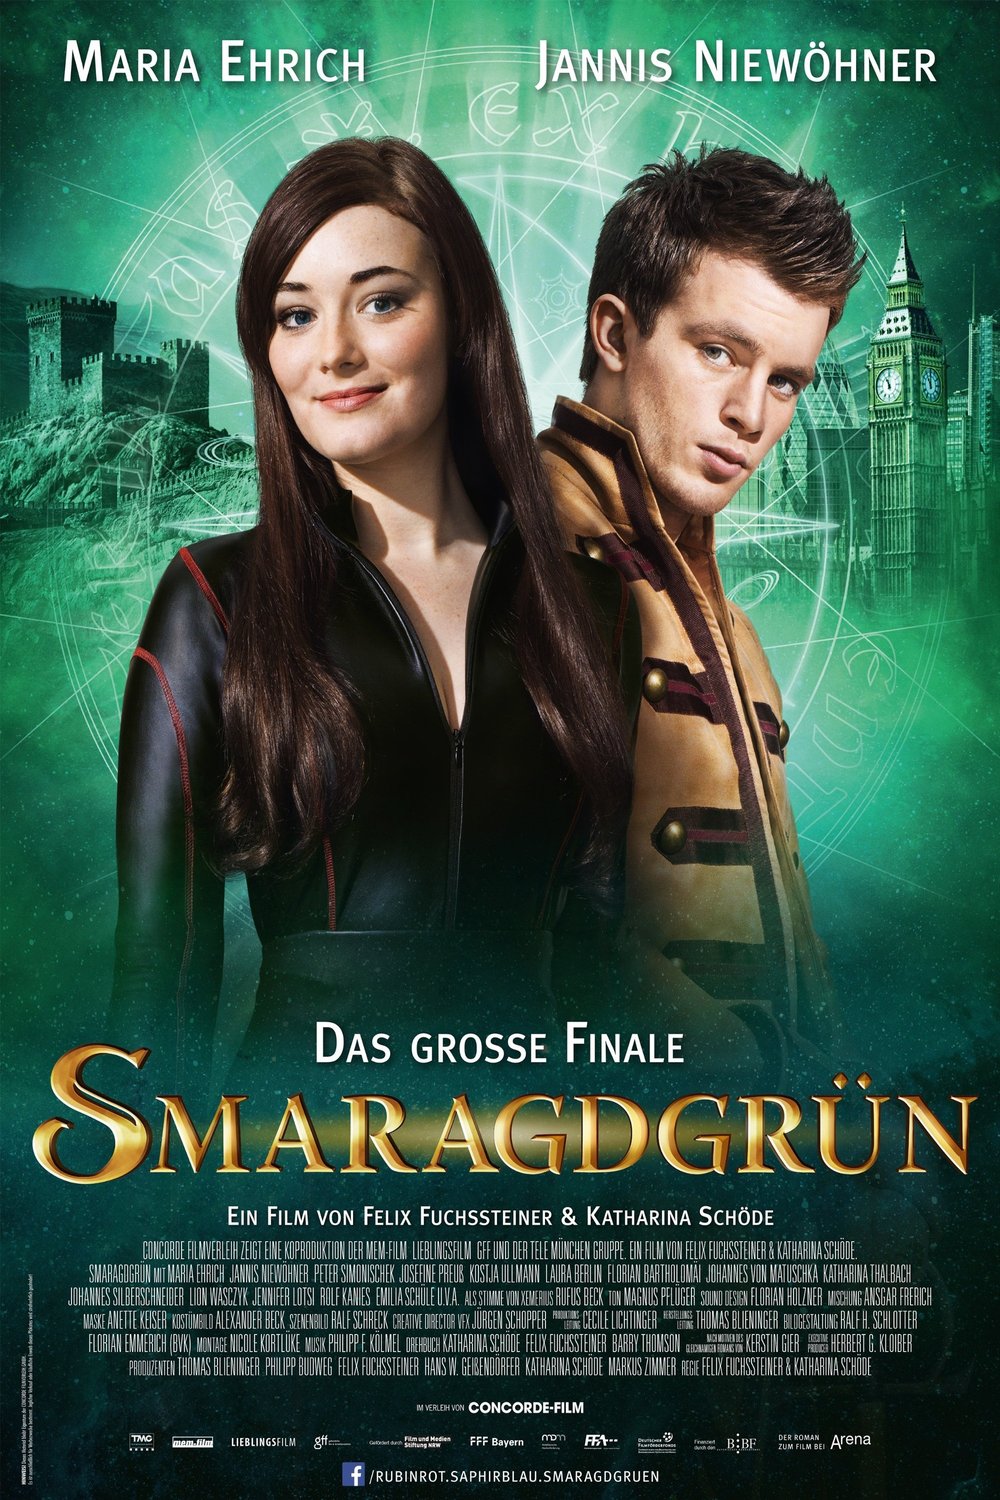 German poster of the movie Emerald Green